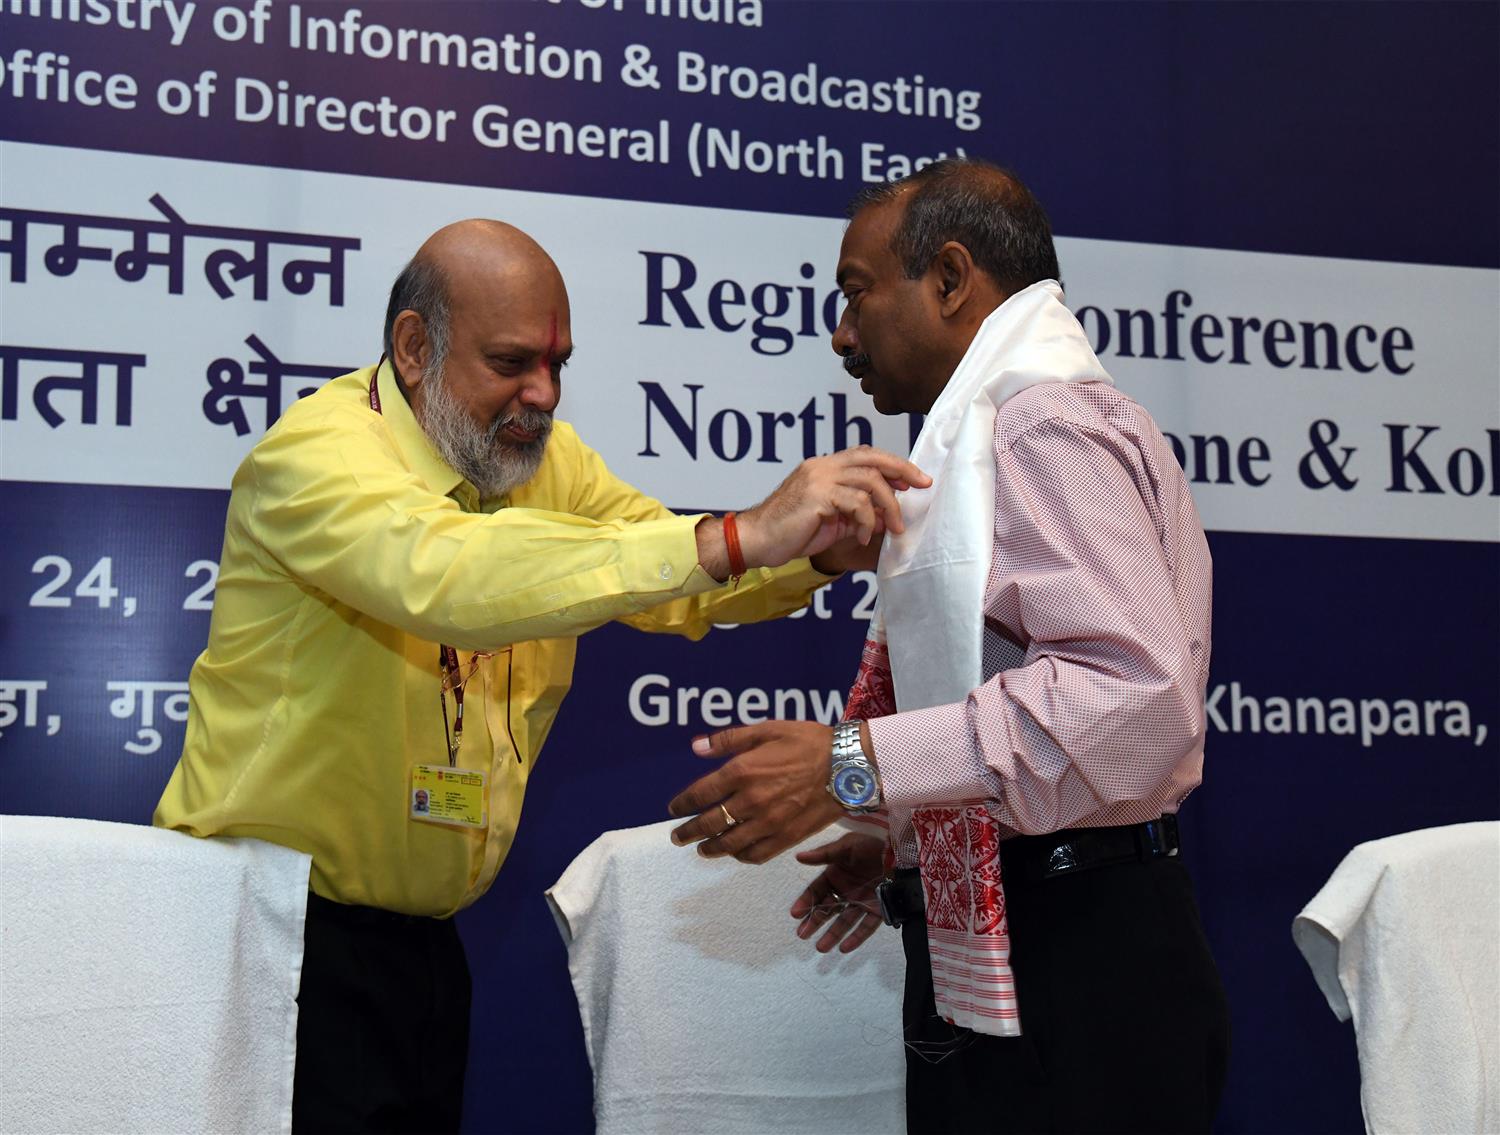 Shri. L.R Vishwanath, Director General North East Zone delivering his speech at the  Regional Conference of NE Zone &  Kolkata Region  at Guwahati  on 24th August 2019, Shri. Vikram Sahay Joint Secretary, Ministry of I& B ,Shri. Shri. Amit Khare, Secretary Ministry of I& B and Shri. Satyendra Prakash, Director General, BOC, New Delhi are also seen in the picture.